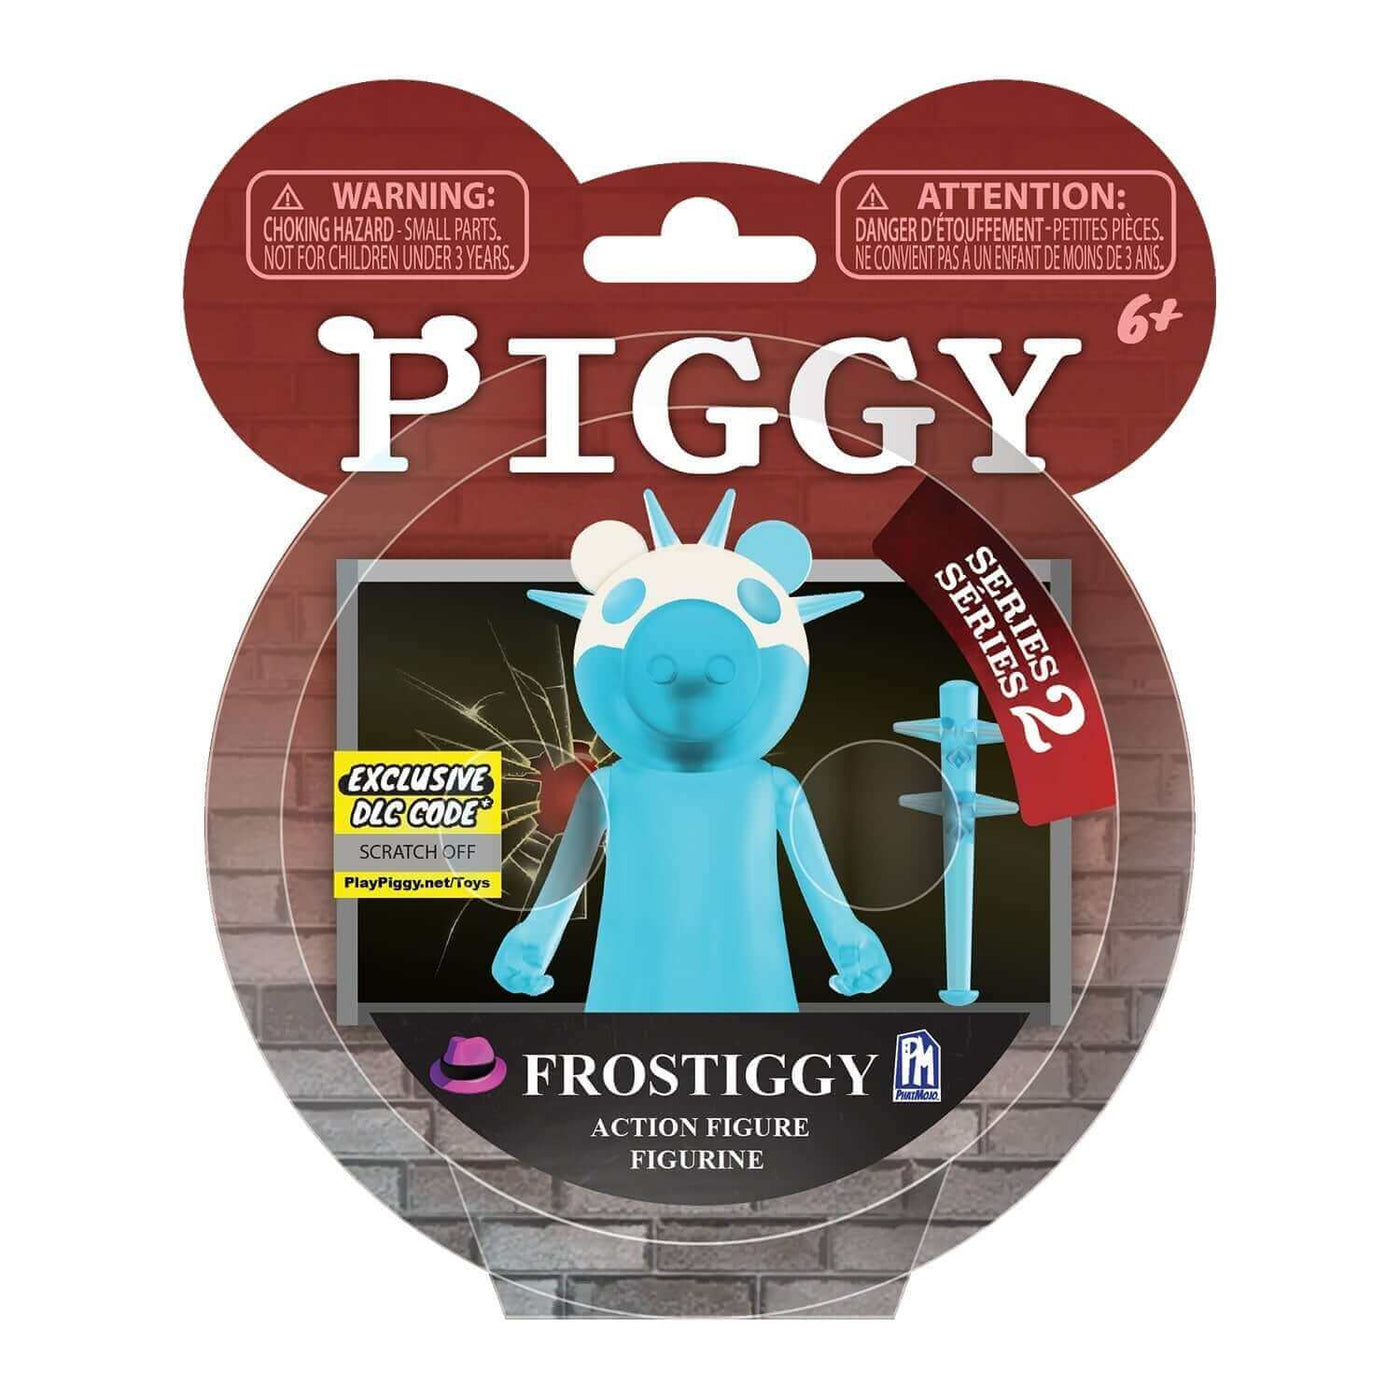 PhatMojo Piggy Series 2 3.5" Action Figures Products: Frostiggy Action Figures Earthlets